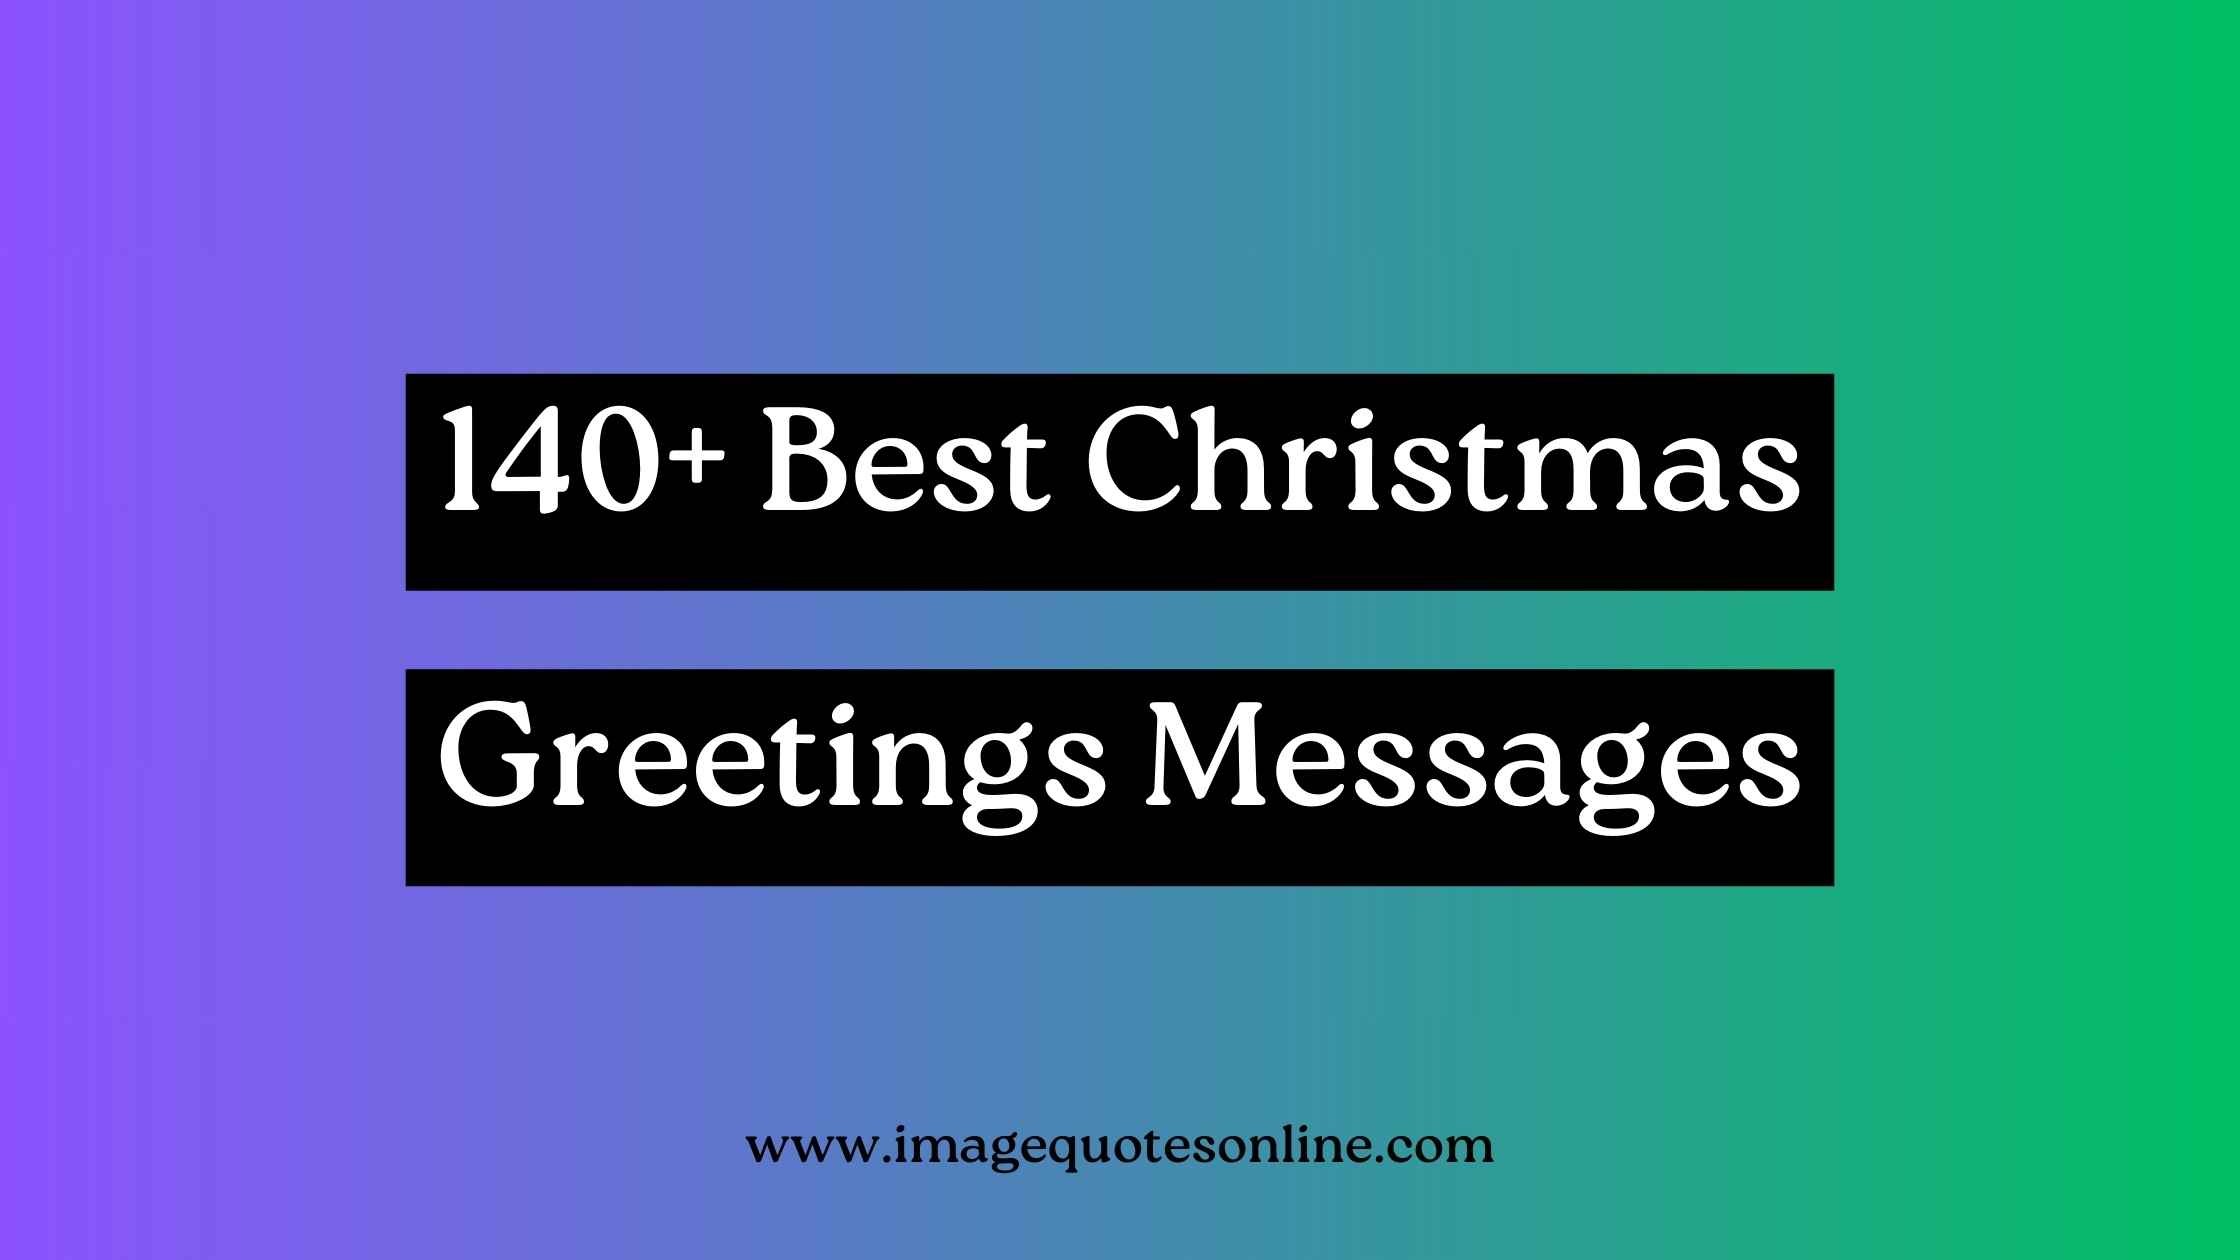 Best Christmas Greetings Messages